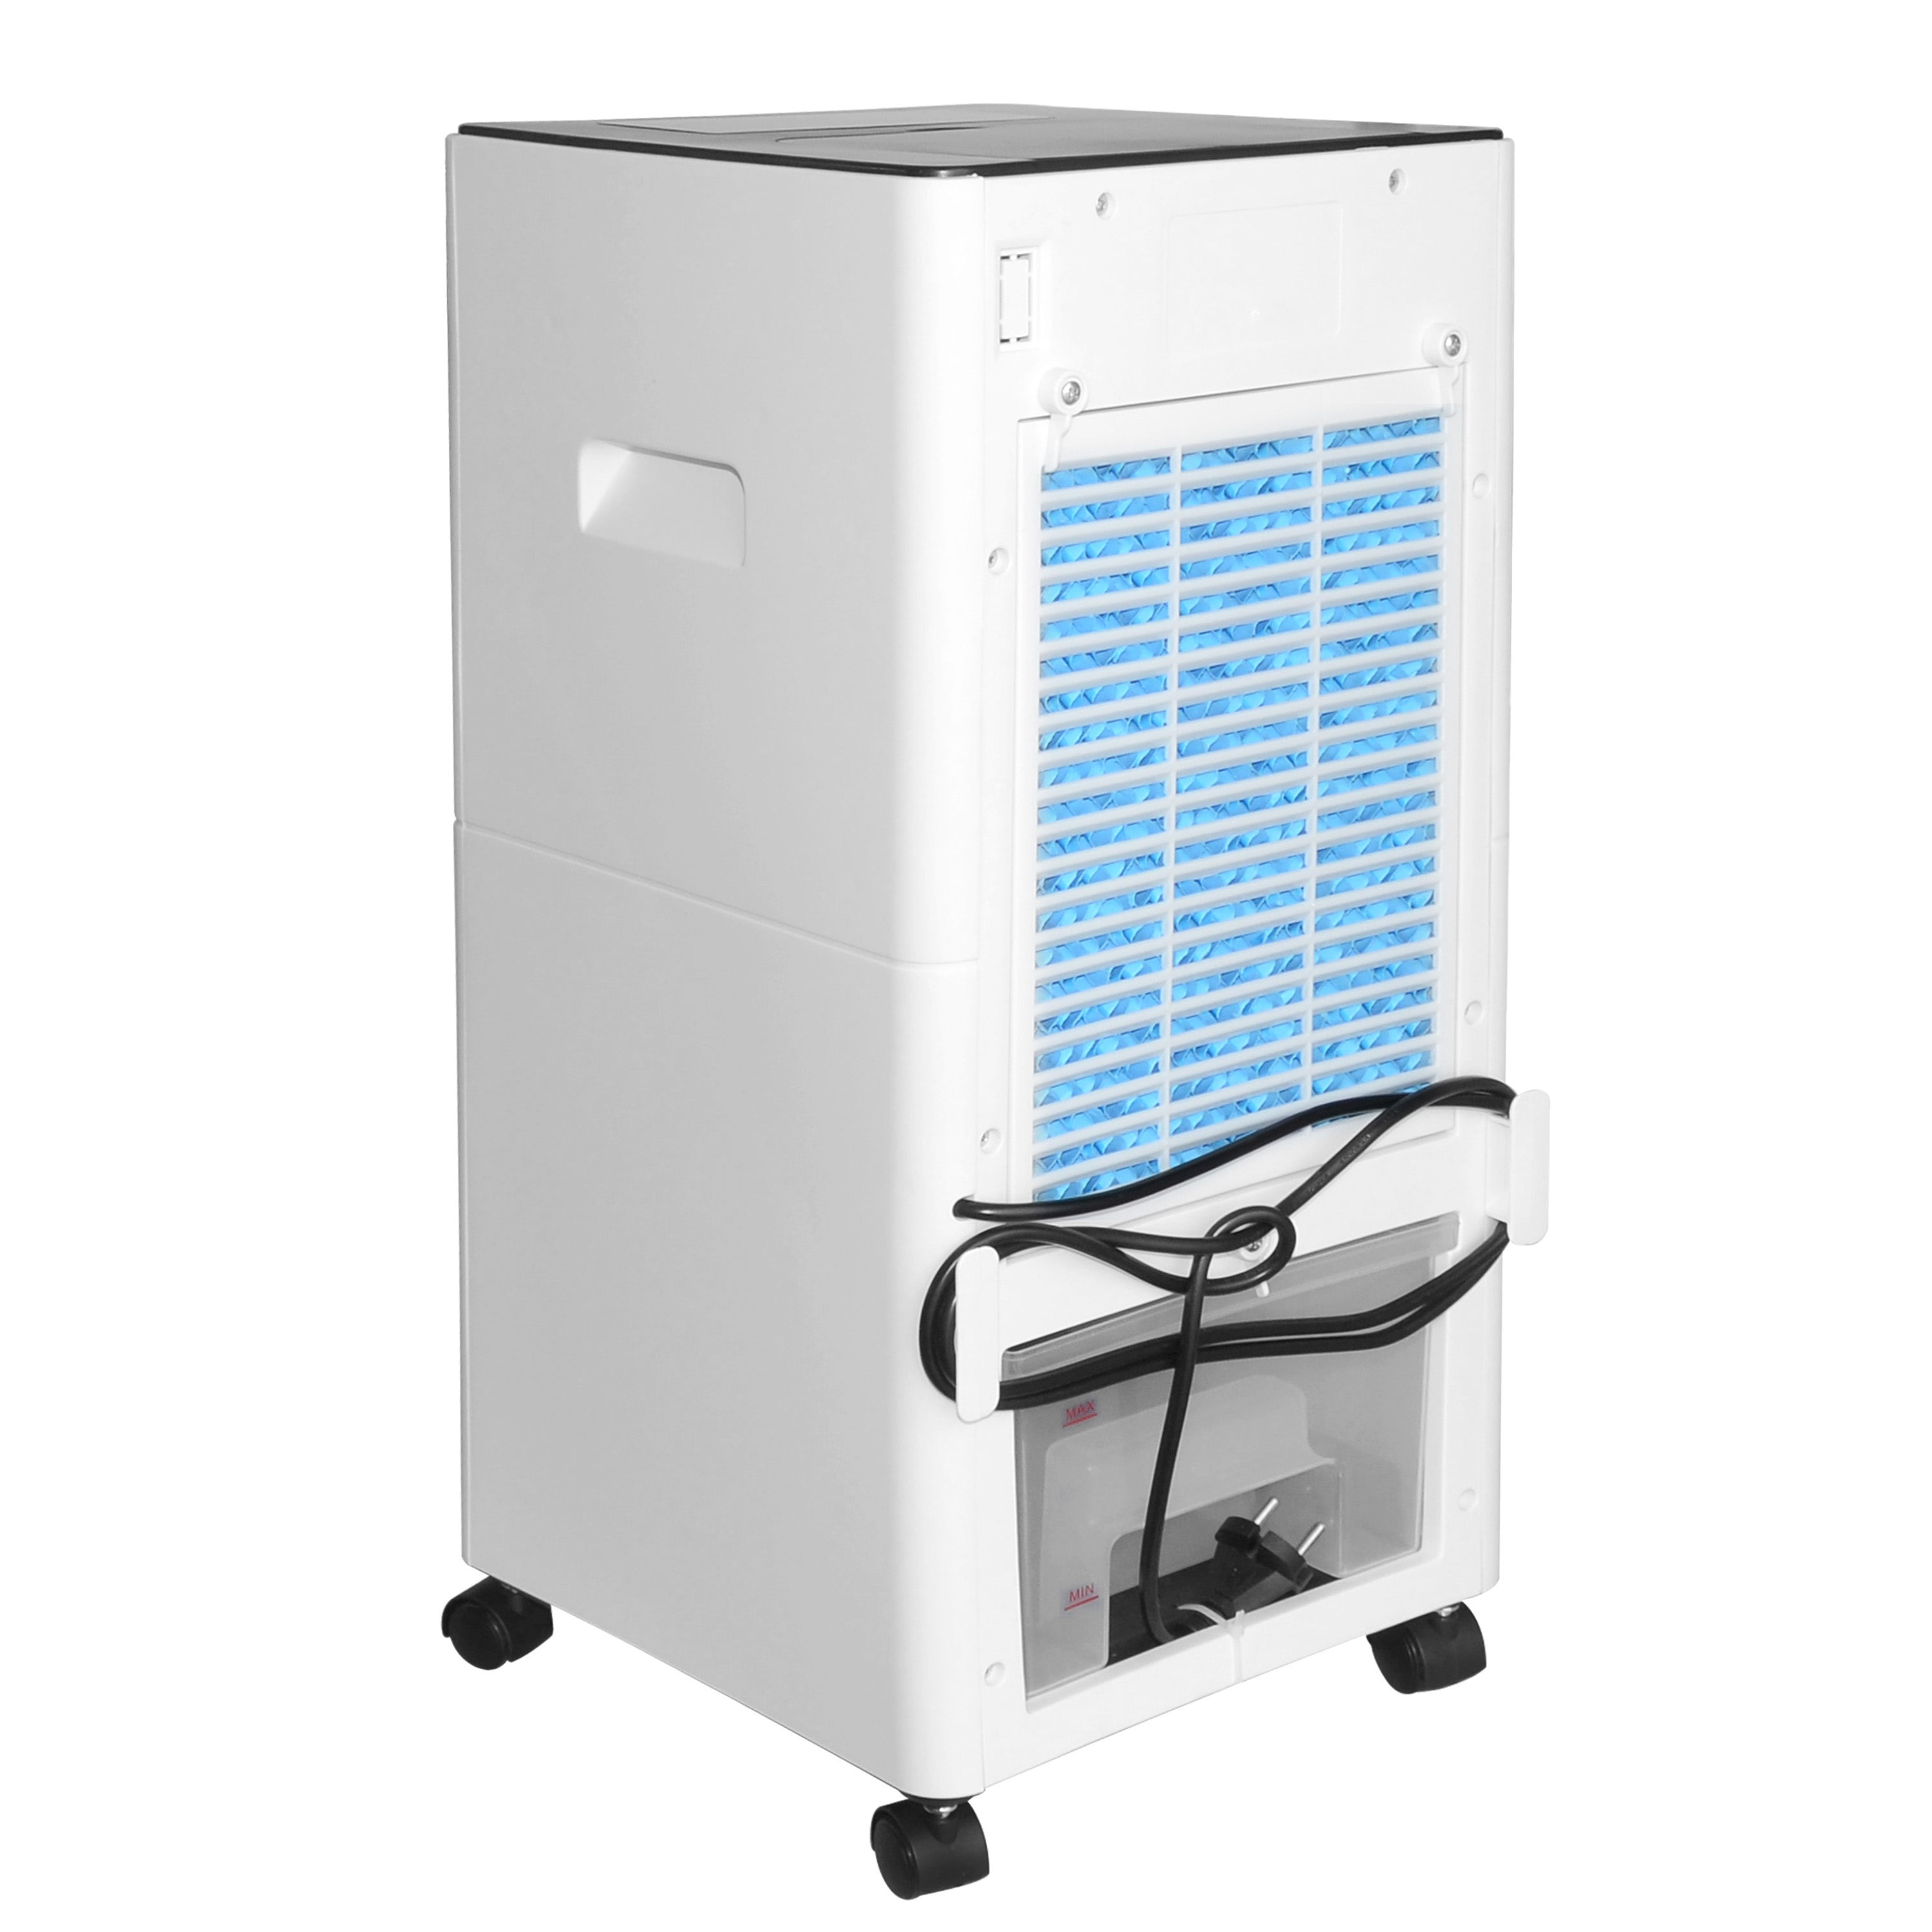 AMOS Eezy Air Coolers